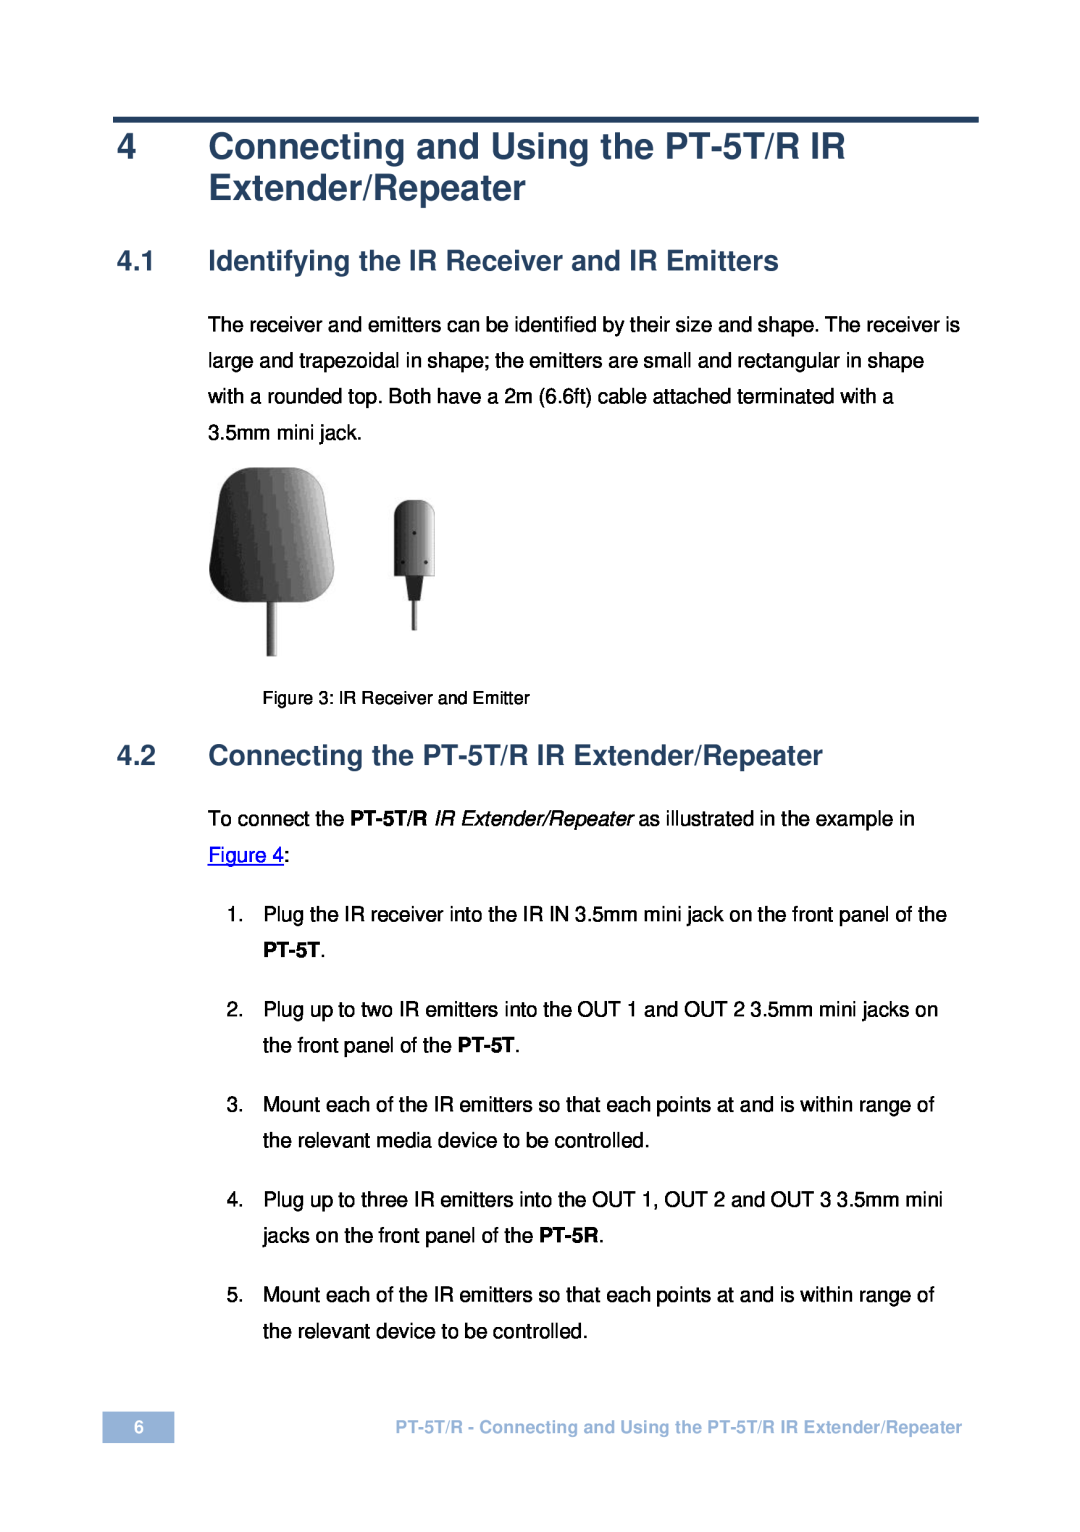 Kramer Electronics 4.1Identifying the IR Receiver and IR Emitters, 4.2Connecting the PT-5T/RIR Extender/Repeater 